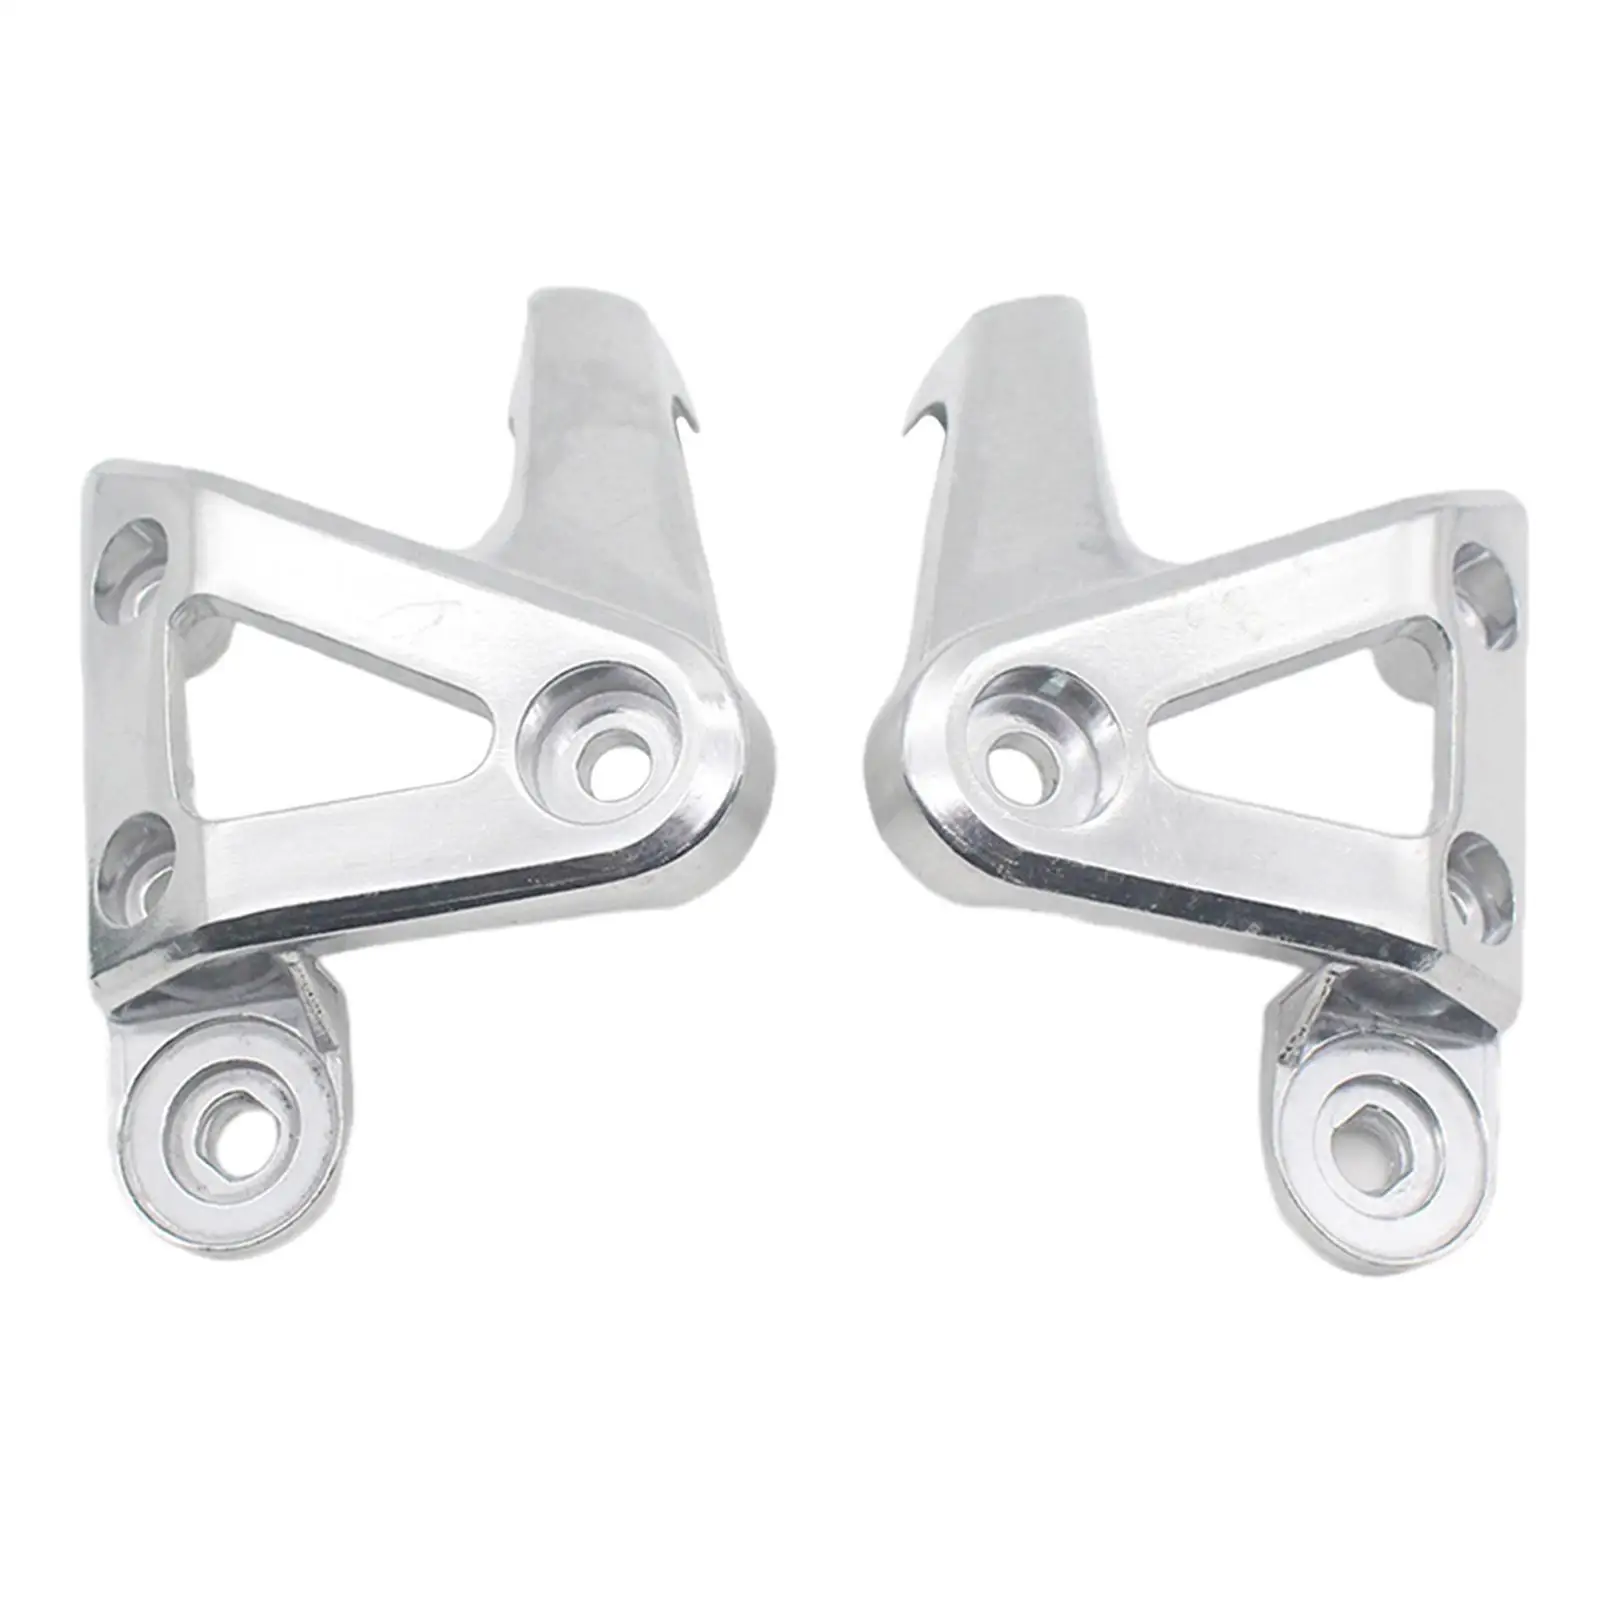 Aluminum Alloy Motorcycles Headlight Holders Brackets for Honda Replace Acc